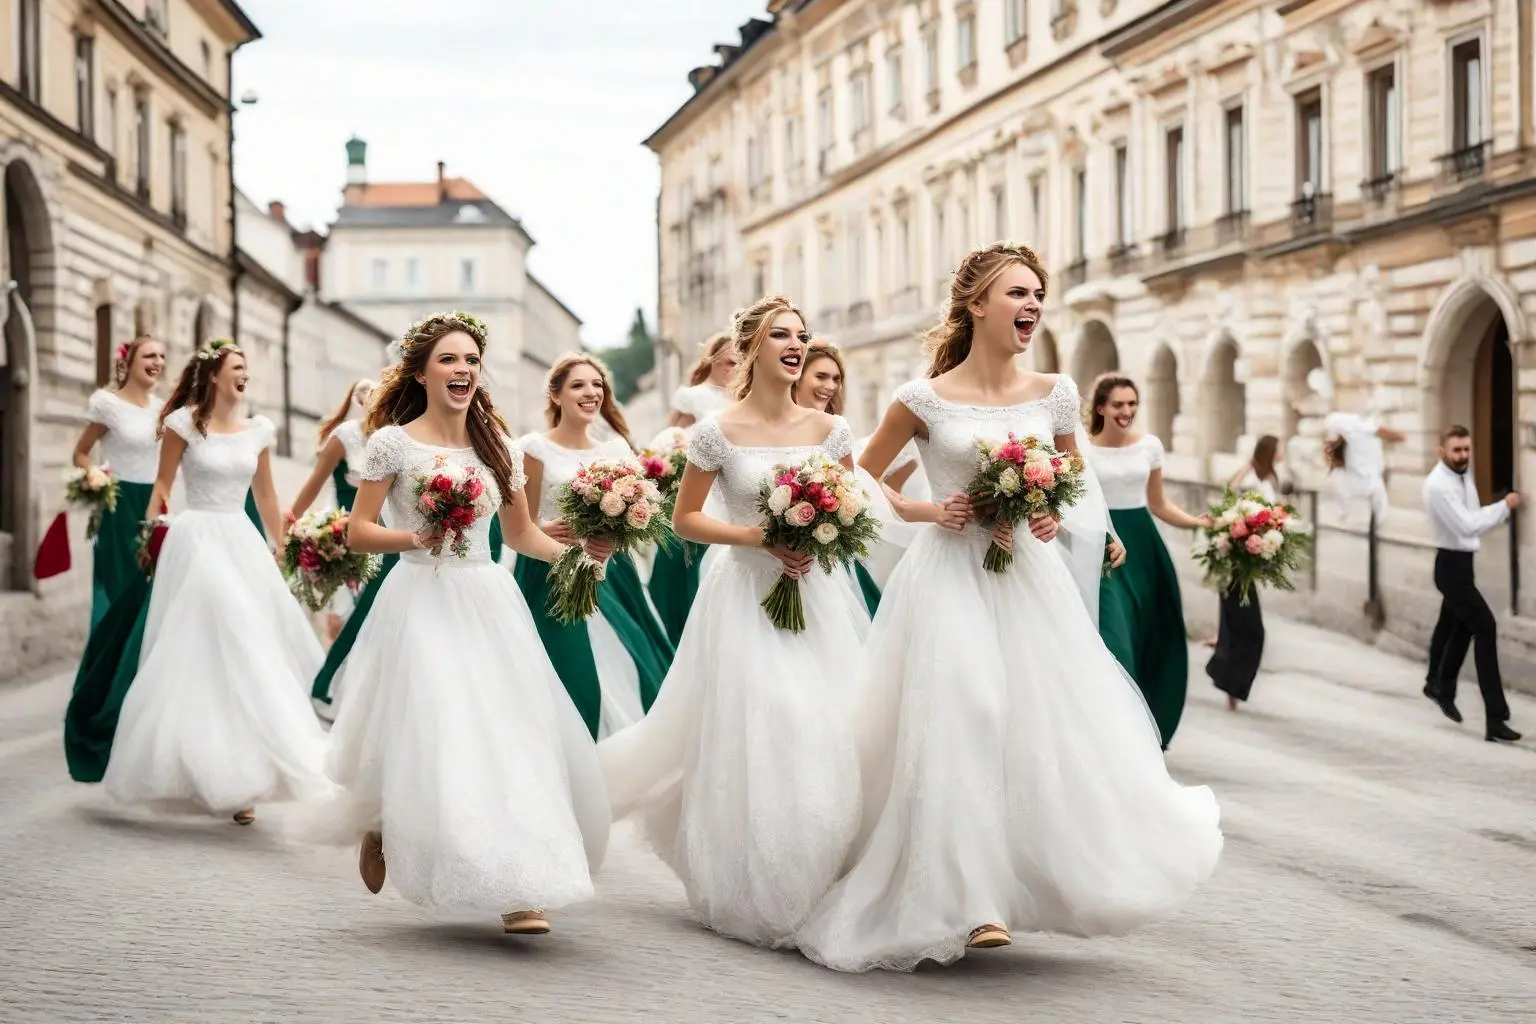 Croatian women are getting married with foreign men